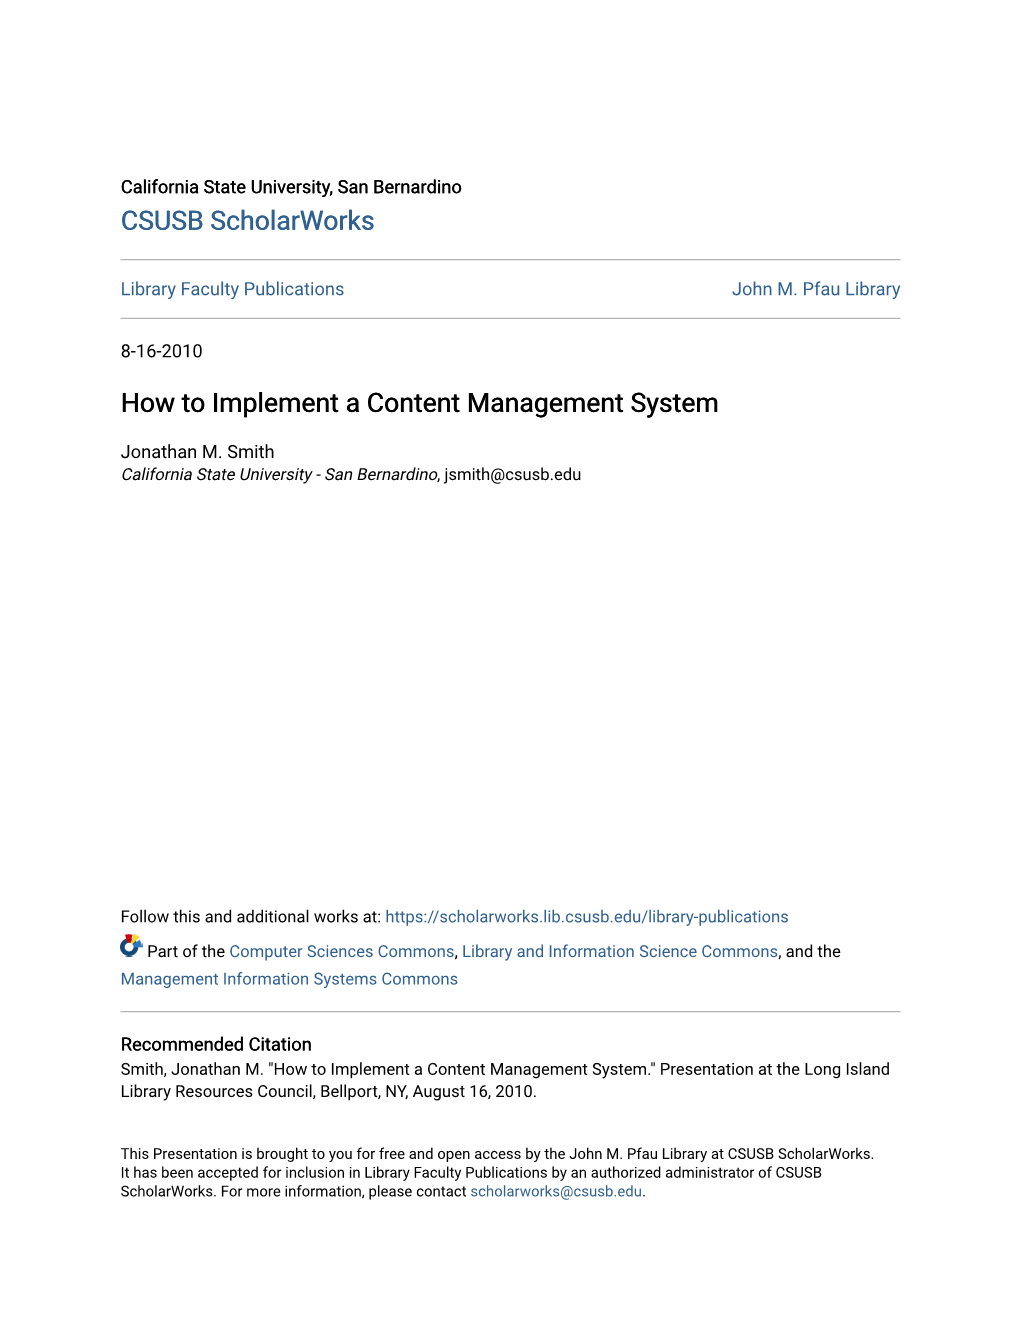 How to Implement a Content Management System